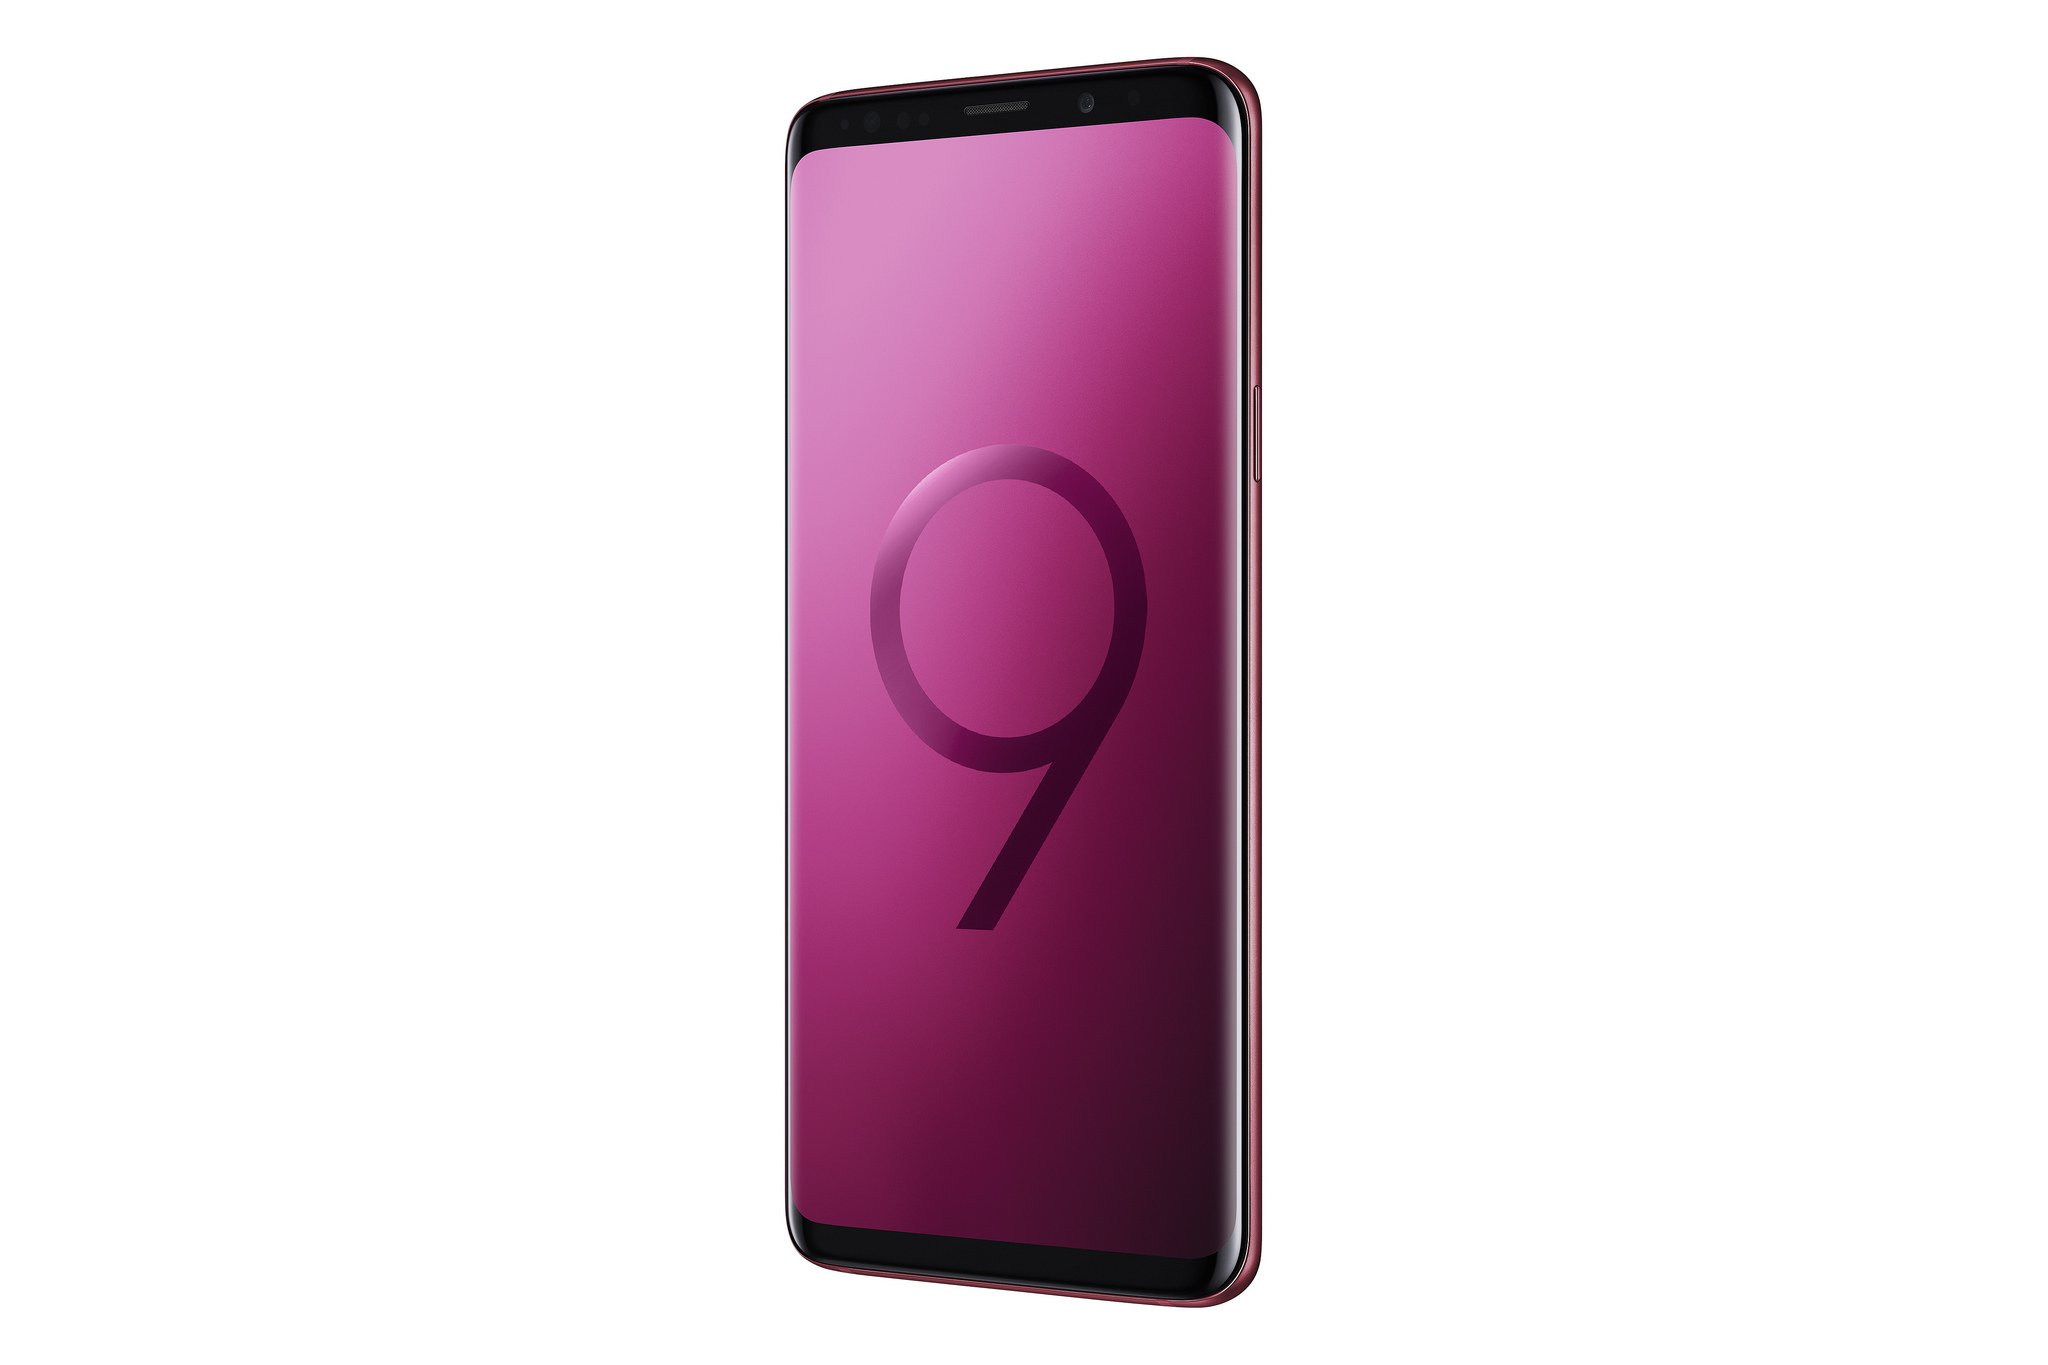 Burgundy Red Galaxy S9 and S9+